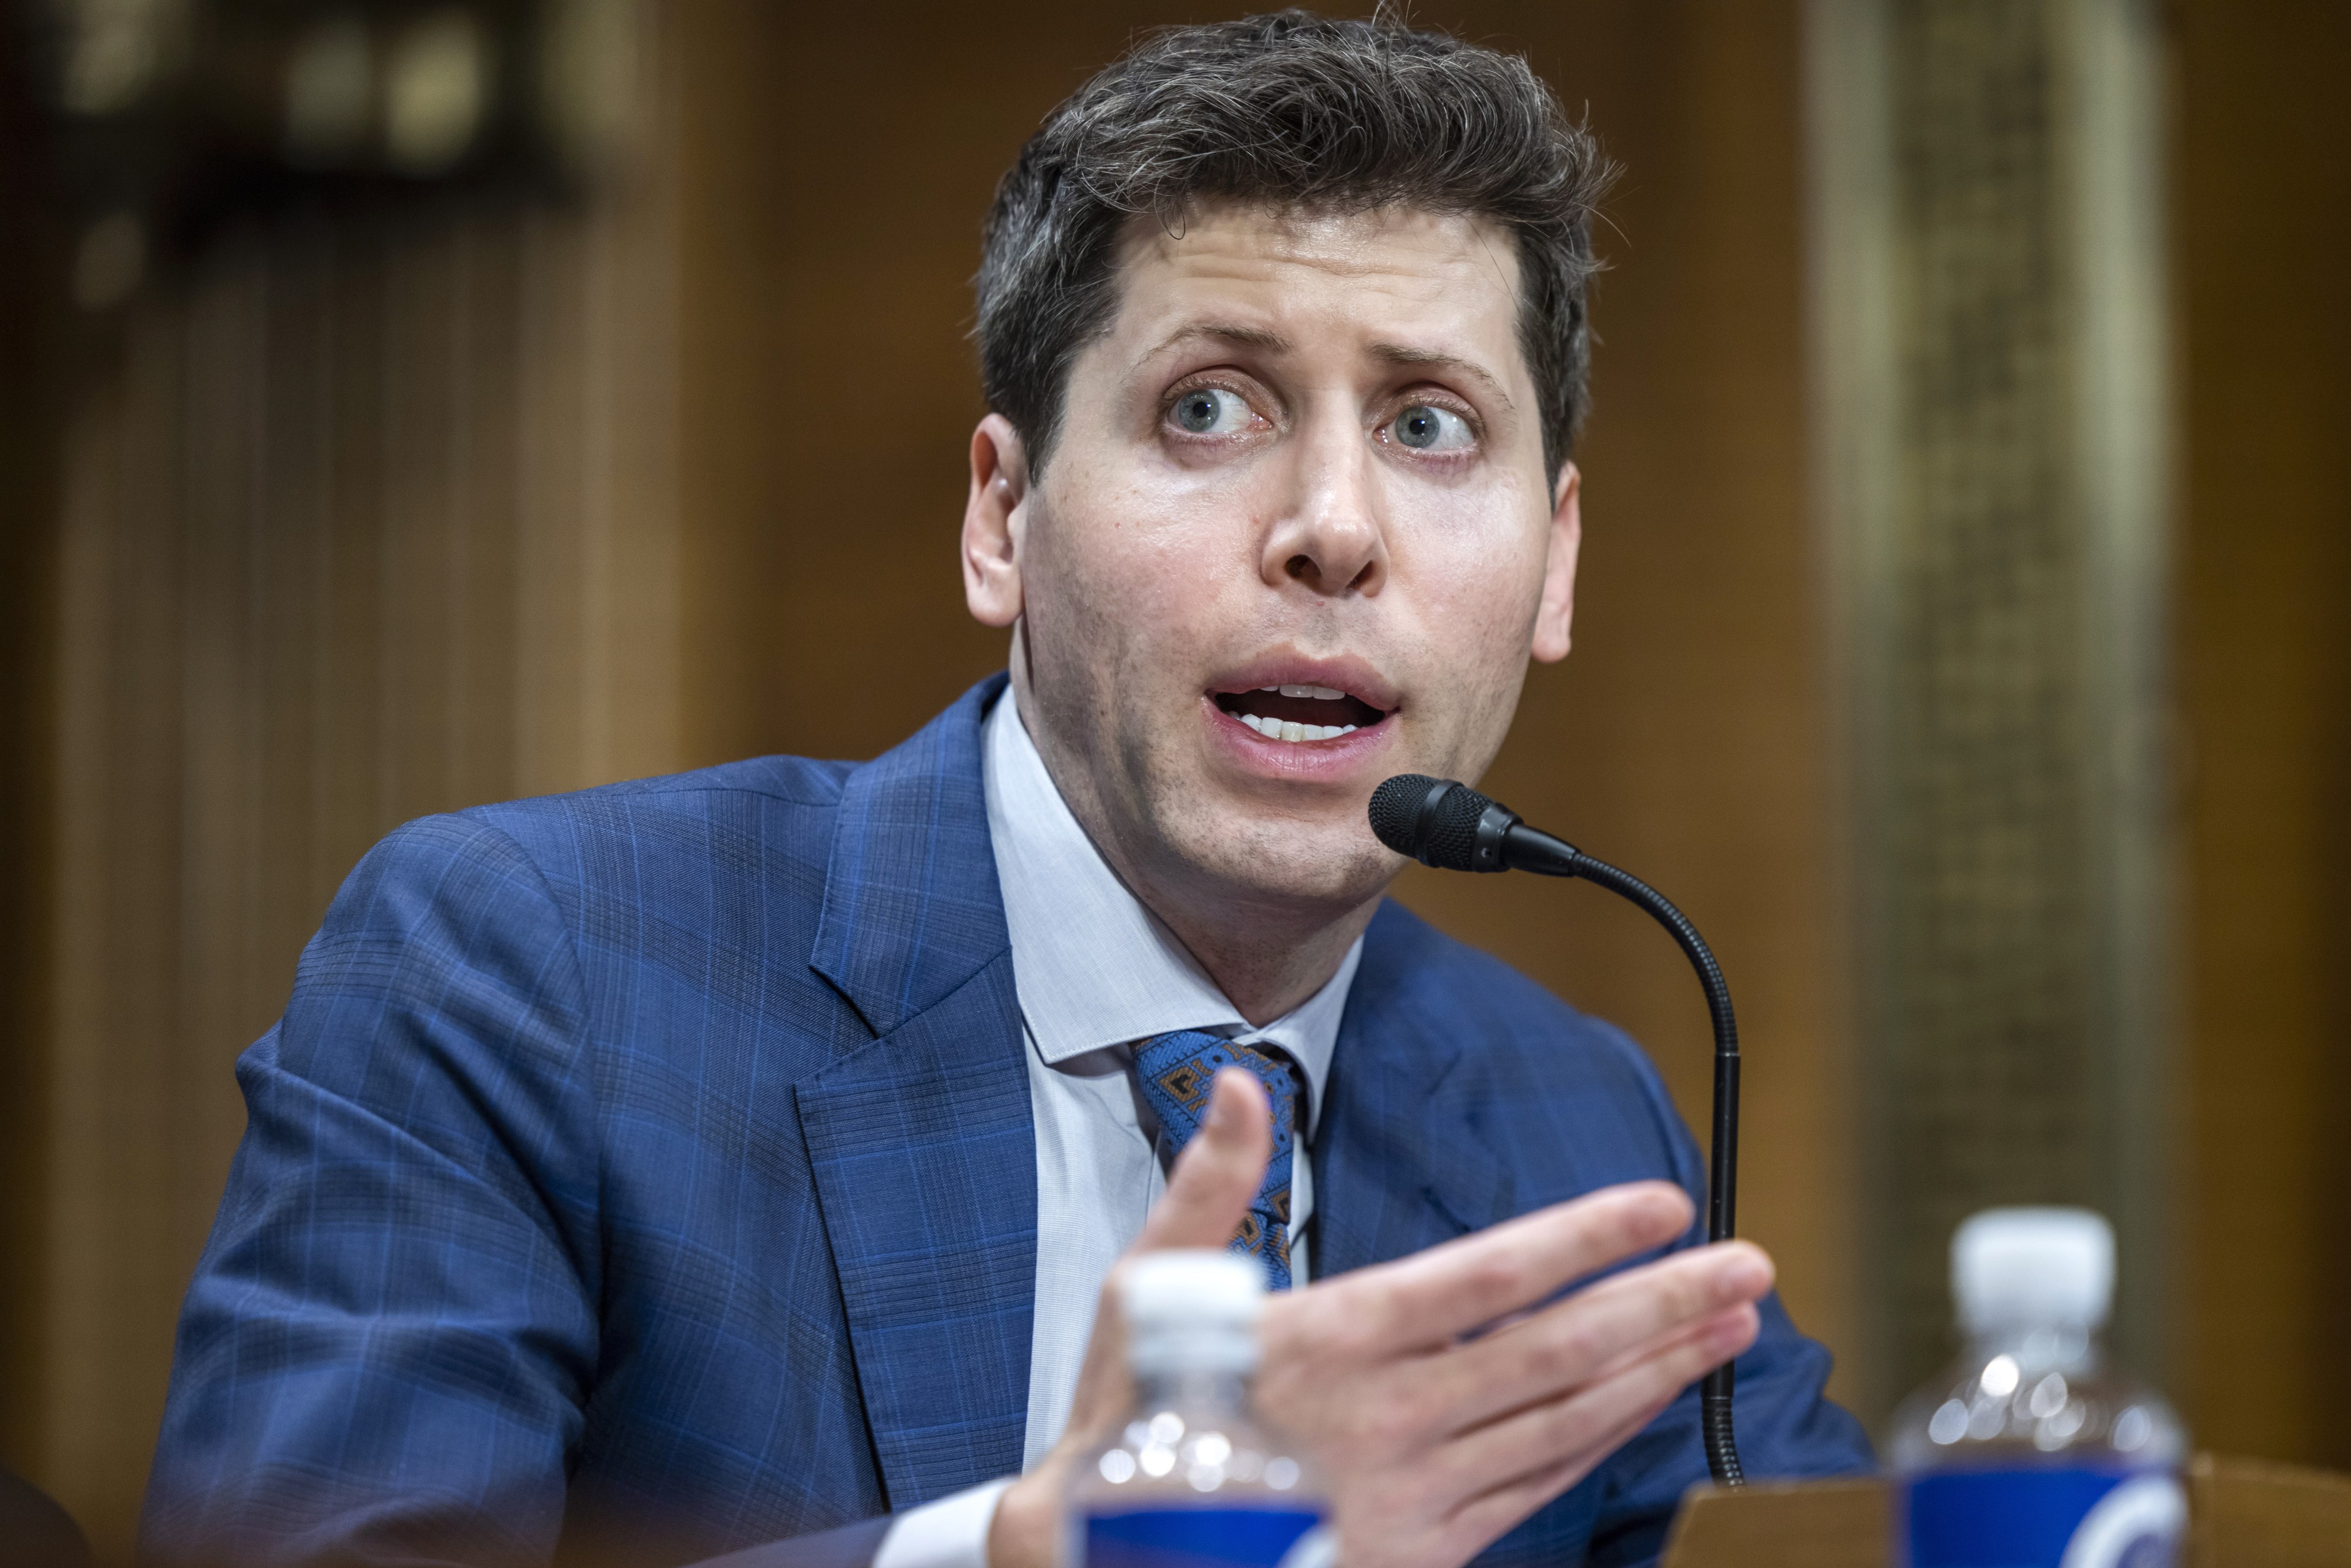 OpenAI CEO Sam Altman testifies before the Senate Judiciary Subcommittee on Privacy, Technology and the Law in Washington on Tuesday. Photo:   EPA-EFE